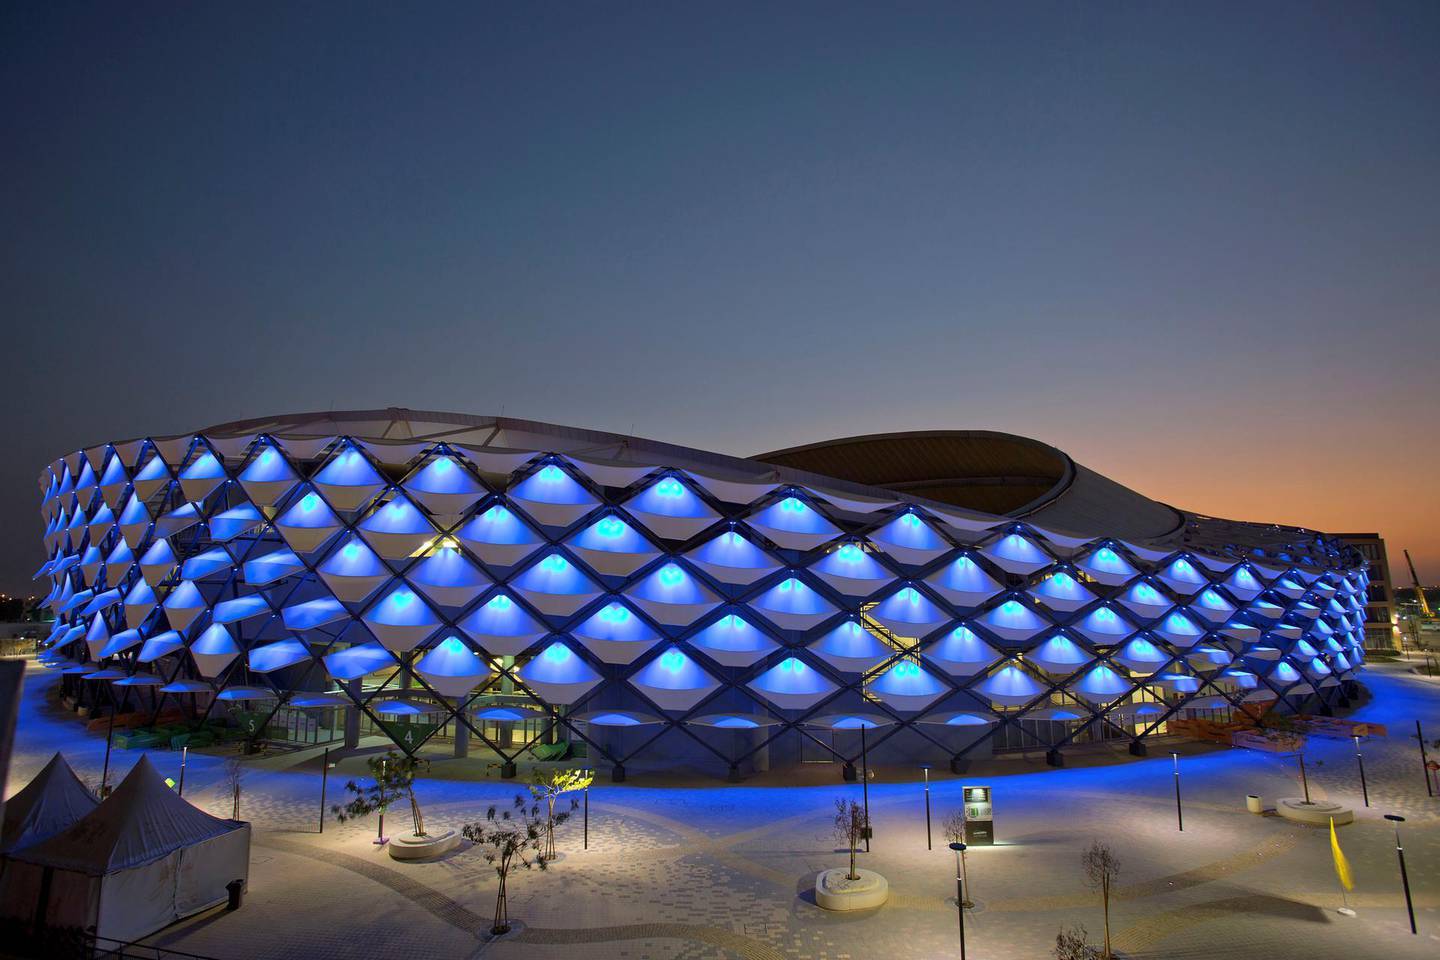 Al Ain’s Hazza bin Zayed Stadium is one of the venues for the 2019 Asian Cup. Courtesy Asian Cup